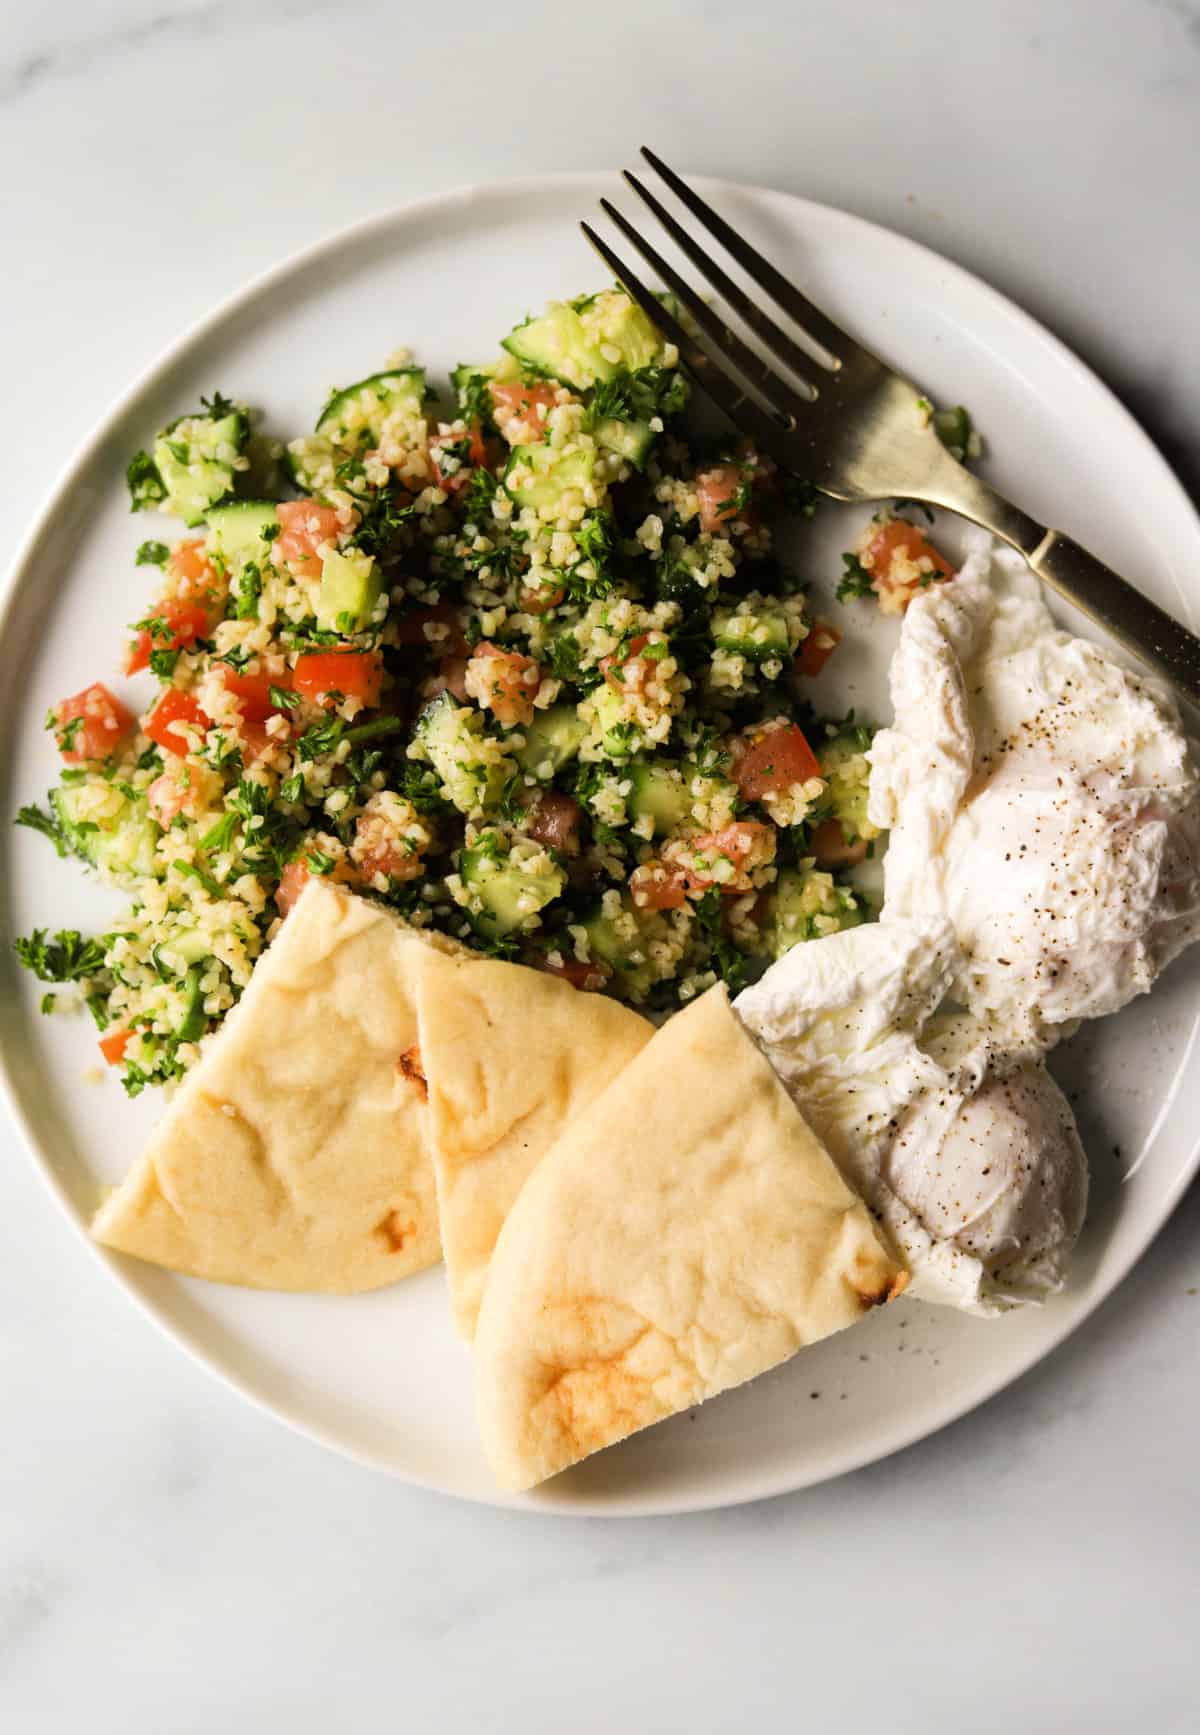 An overhead close up shot of a plate of tabouli with poached eggs and pita wedges.